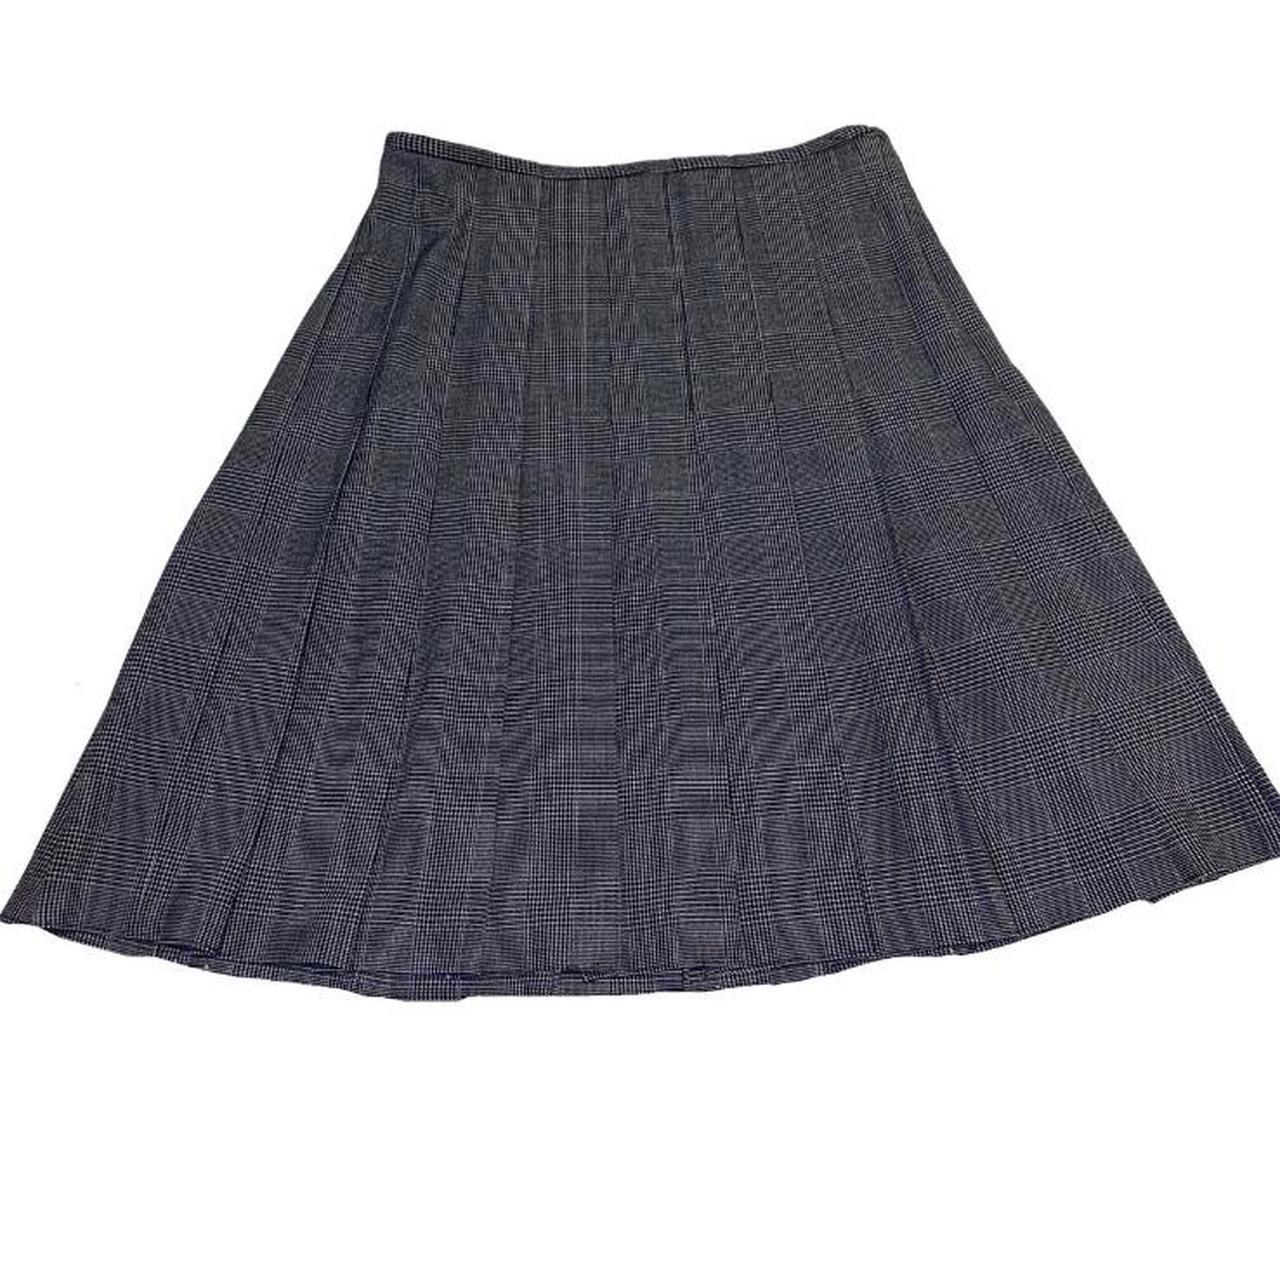 Vintage high rise pleated skirt ♡ This is a... - Depop